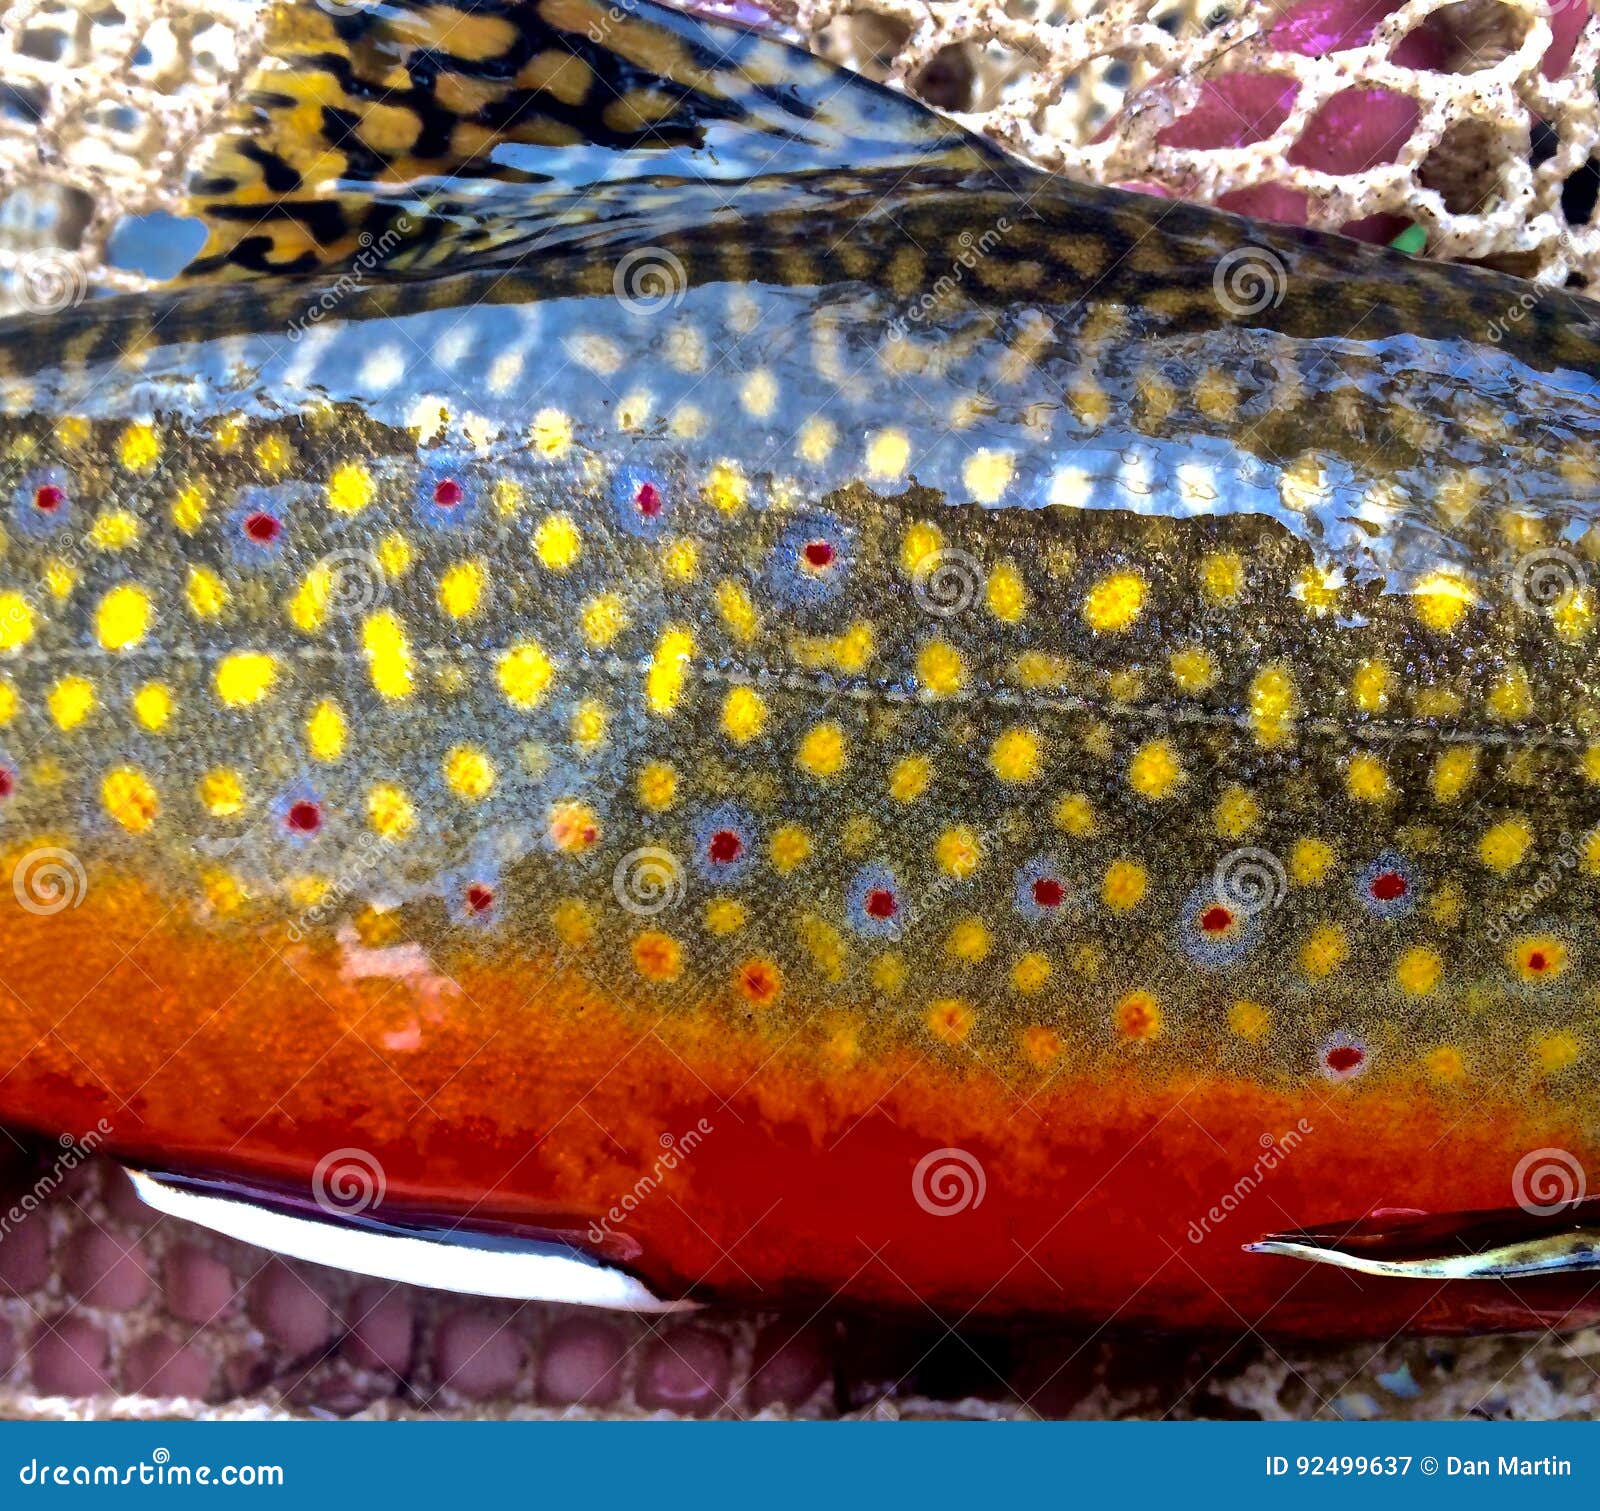 a spawning brook trout colors